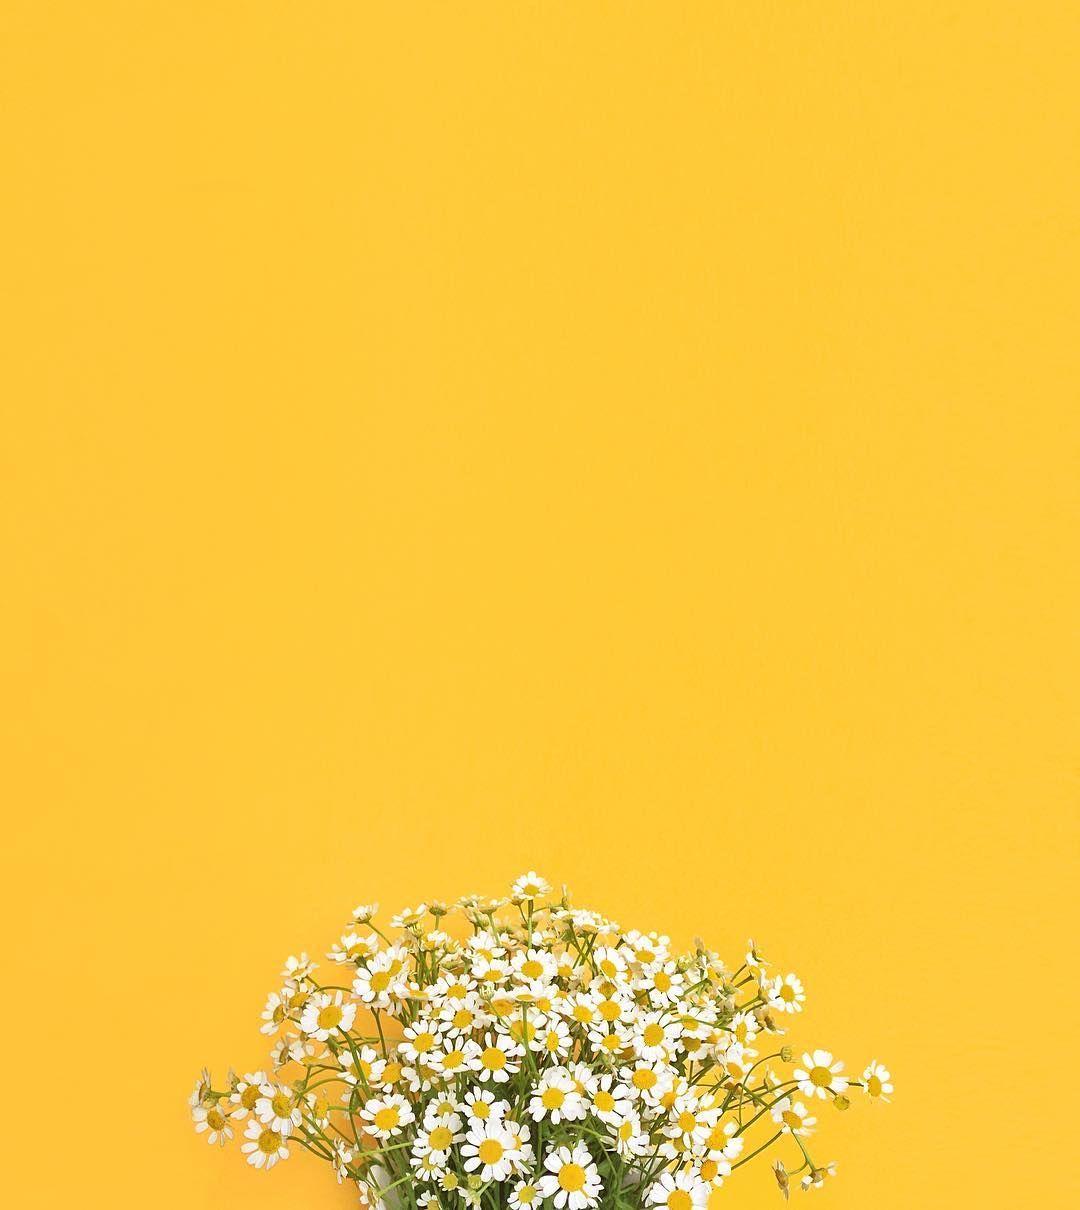 Flowers Composition Chamomile Flowers On Yellow Background Spring Summer  Concept Flat Lay Top View Copy Space Stock Photo Download Image Now IStock  